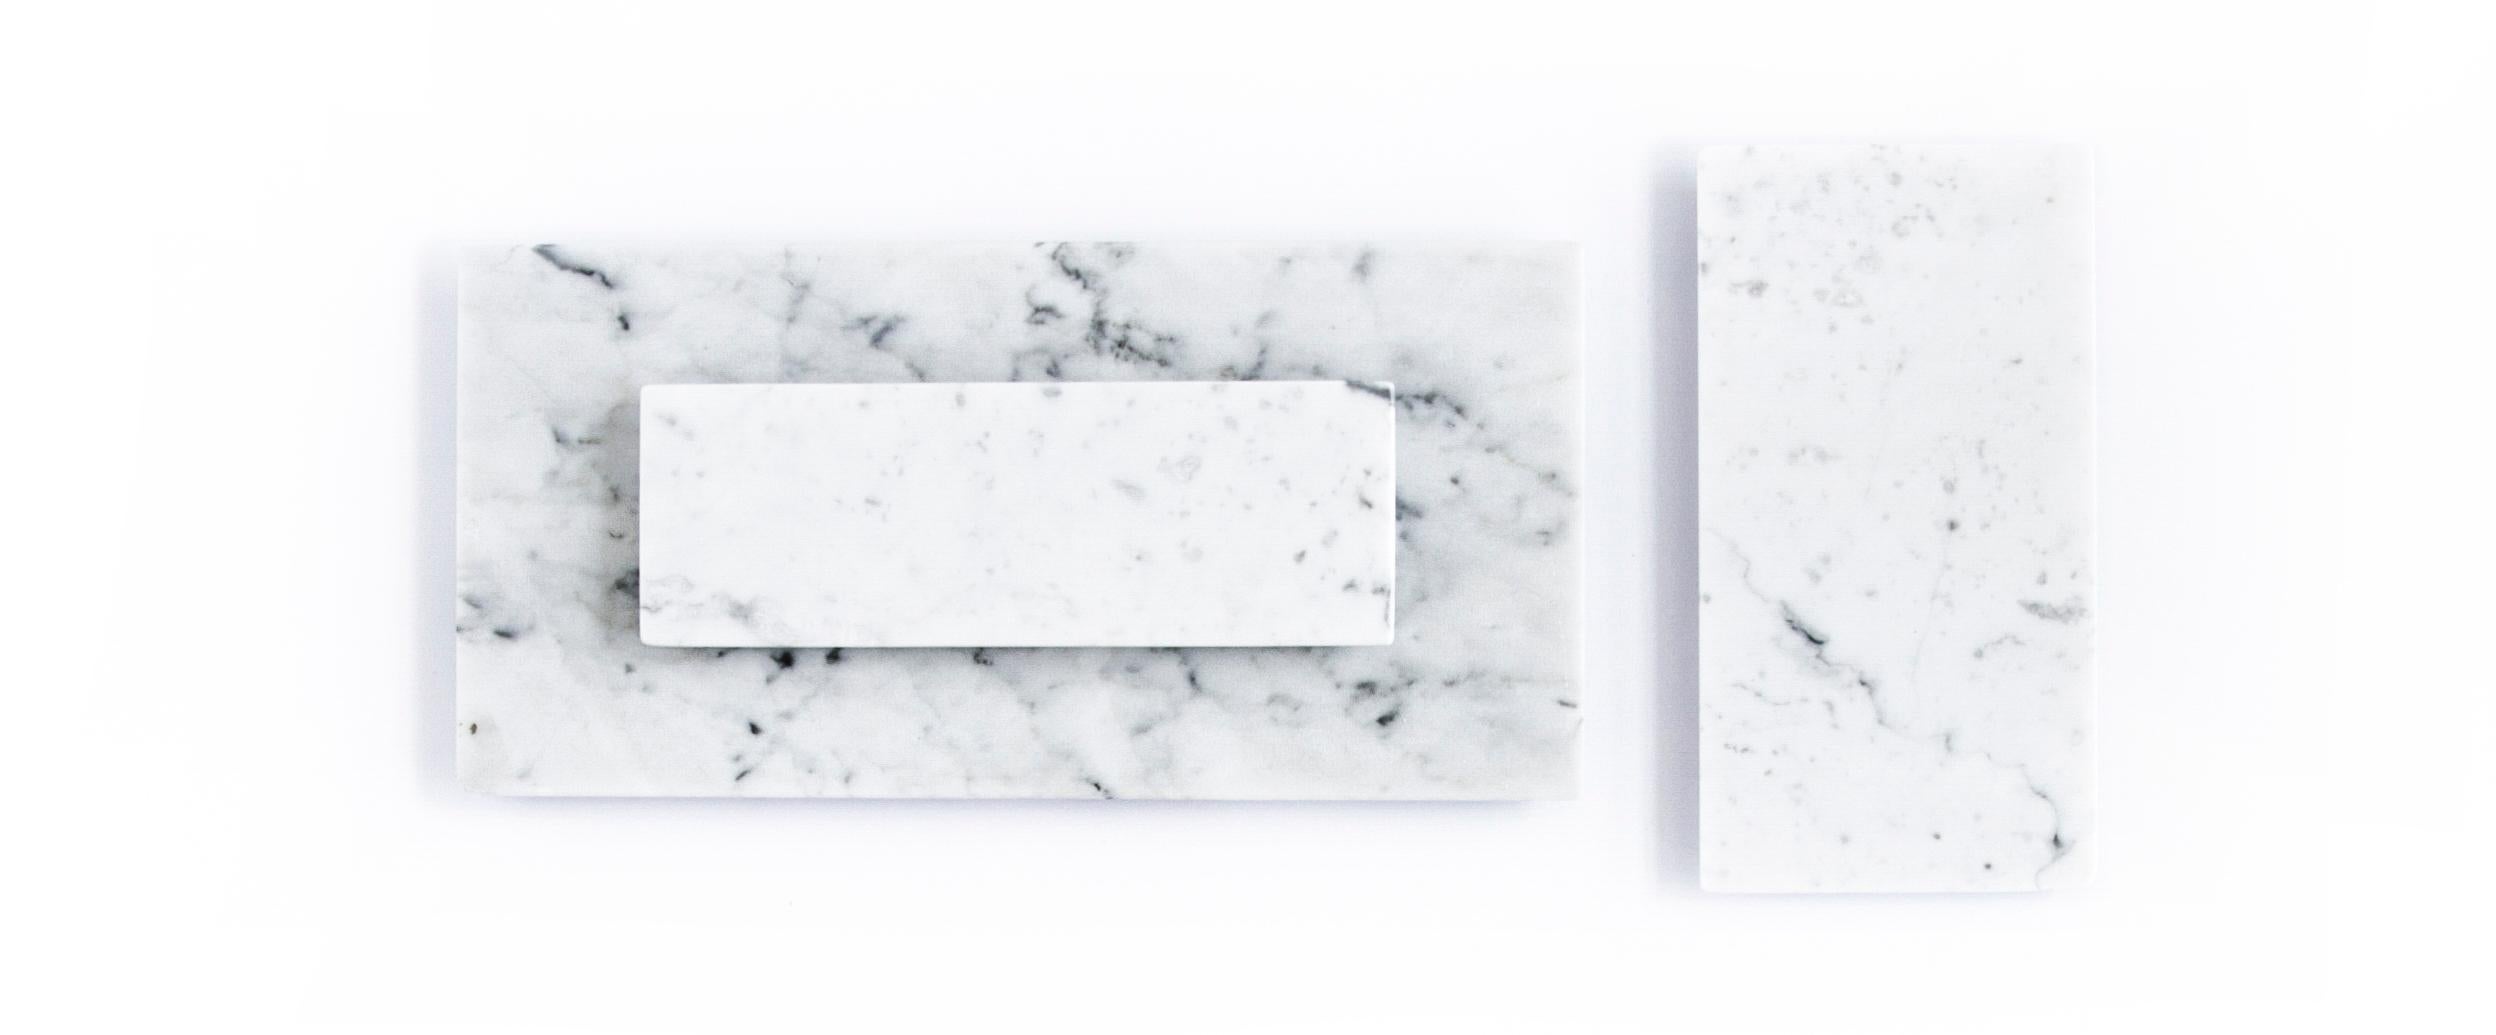 Set of 3 canapè - cheese plates - sushi plates - serving dishes in 3 different sizes in white Carrara marble.
Big 30.5 x 15 x 1 cm - Medium 20 x 10.5 x 1 cm - Small 20 x 7 x 1 cm
Ideal for spa, hotel, restaurant and to serve food in a very